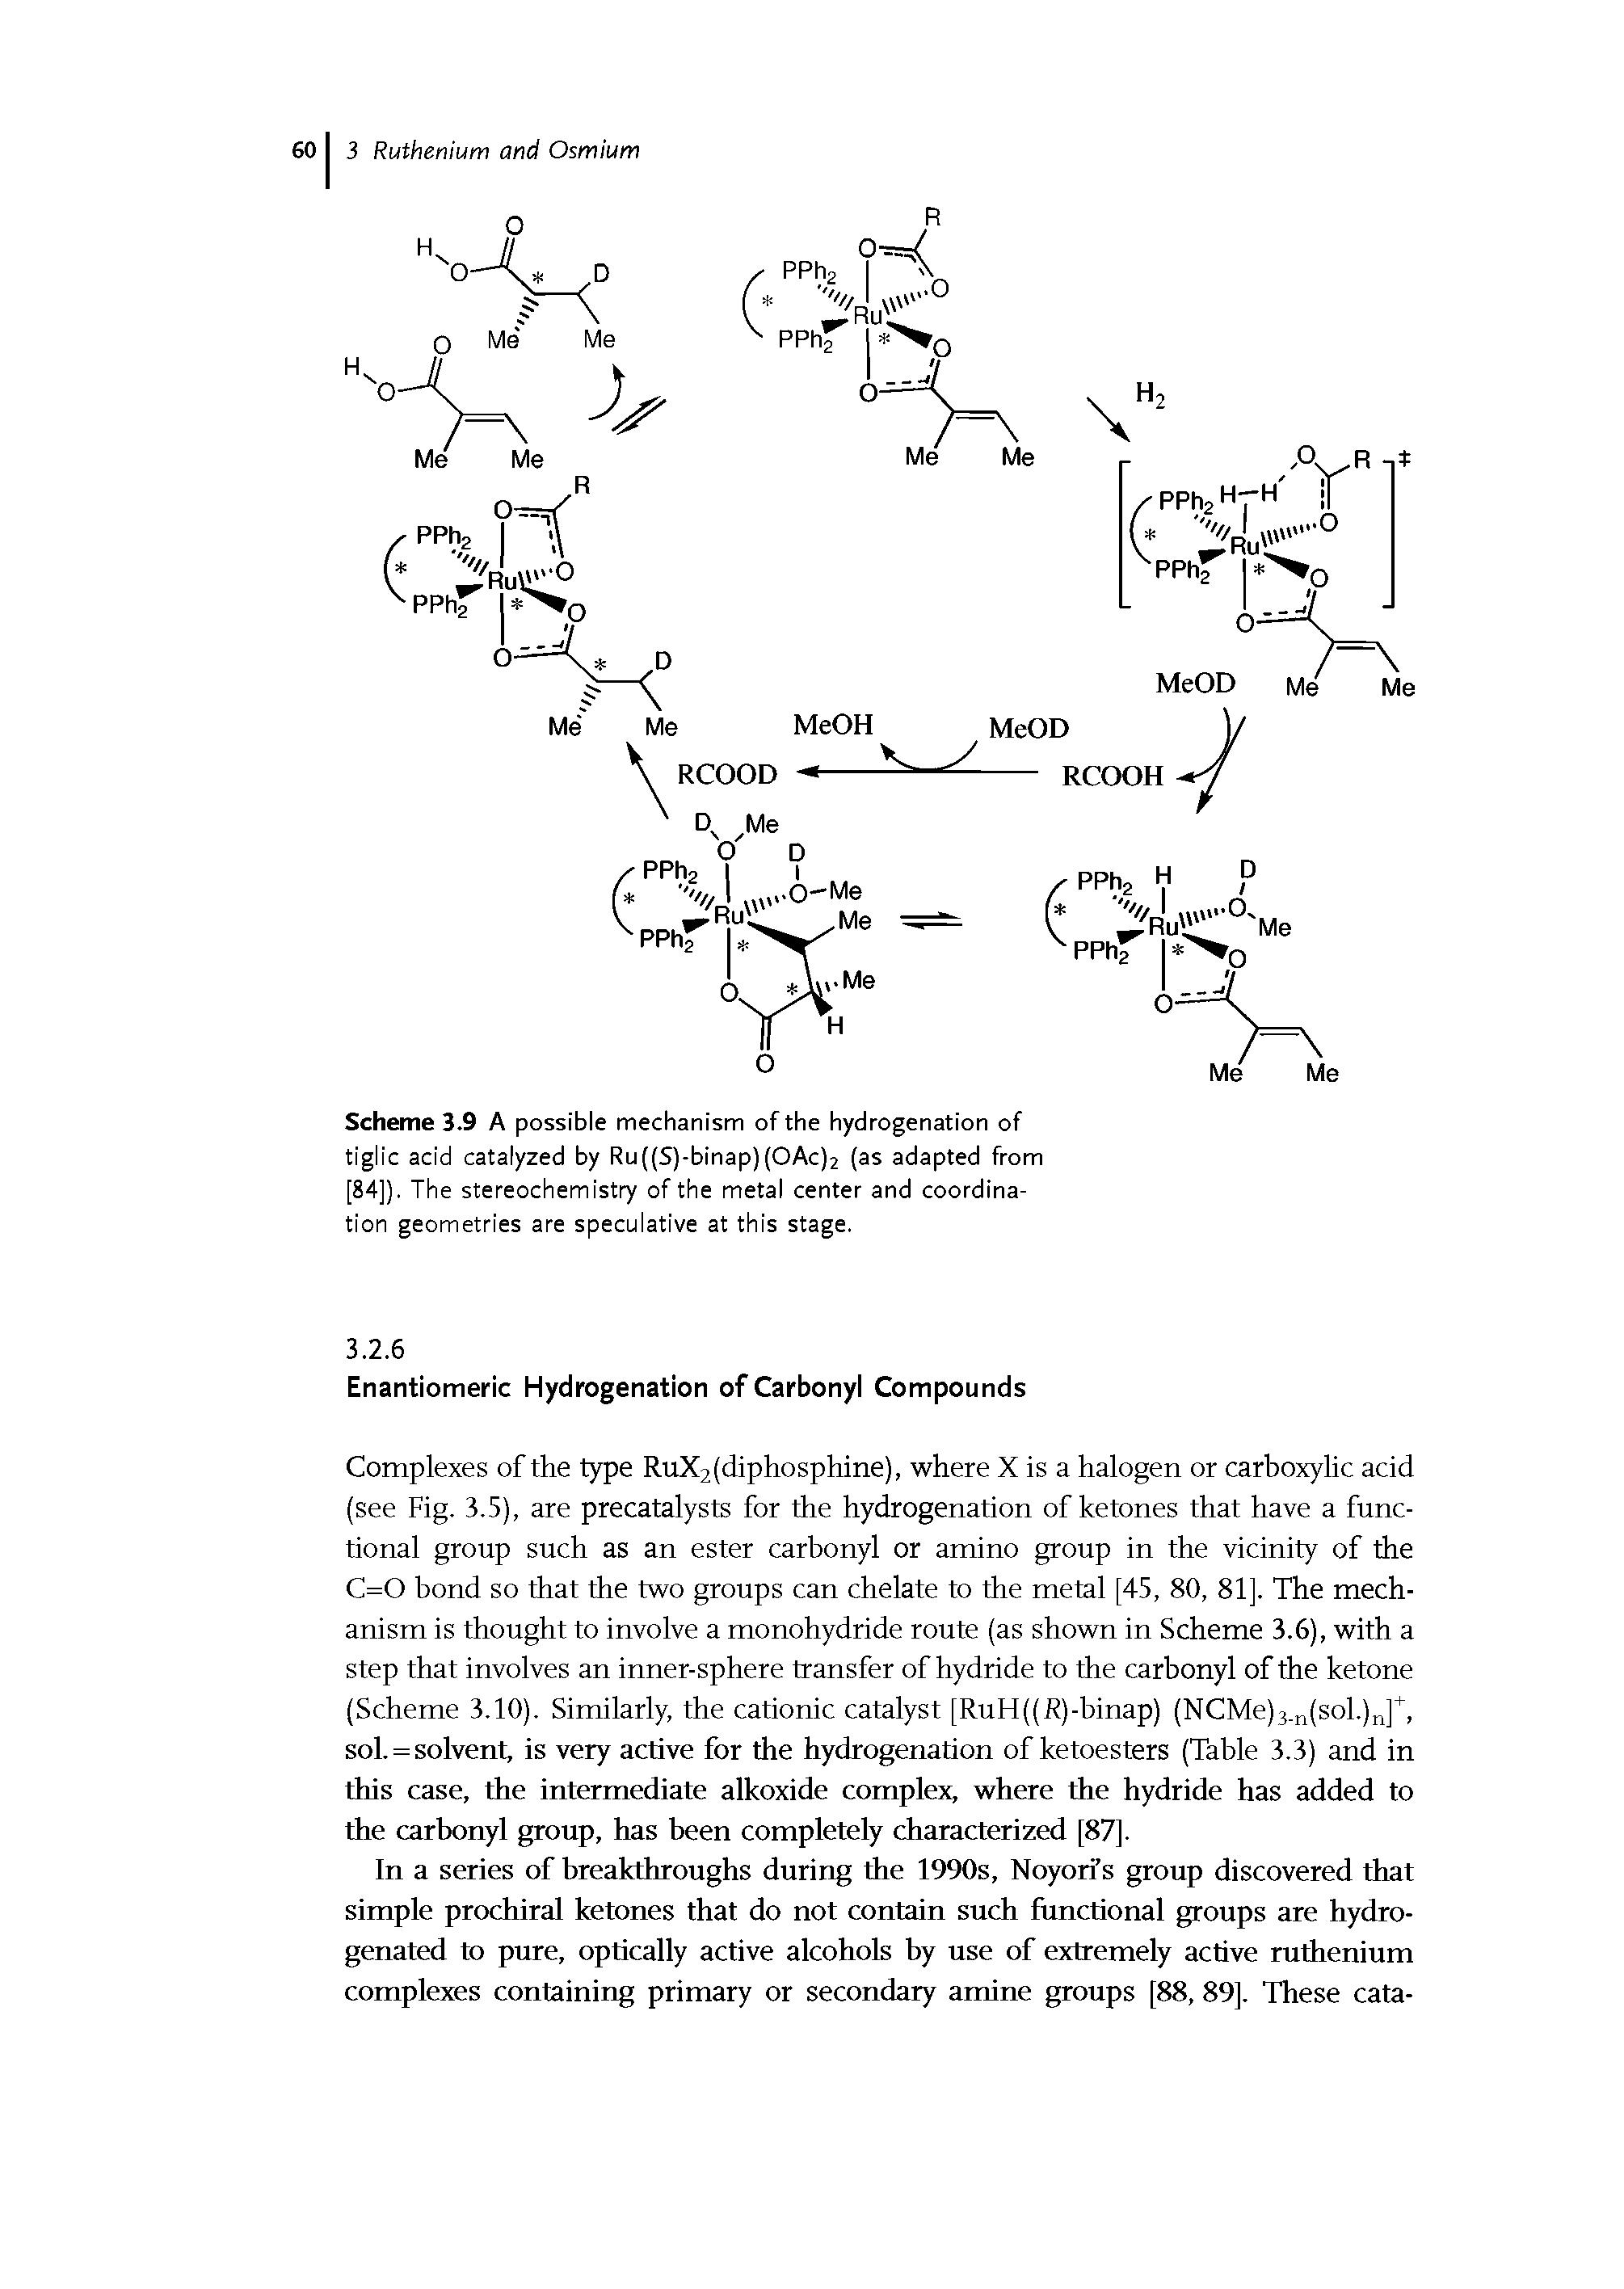 Scheme 3.9 A possible mechanism of the hydrogenation of tiglic acid catalyzed by Ru((S)-binap)(OAc)2 (as adapted from [84]). The stereochemistry of the metal center and coordination geometries are speculative at this stage.